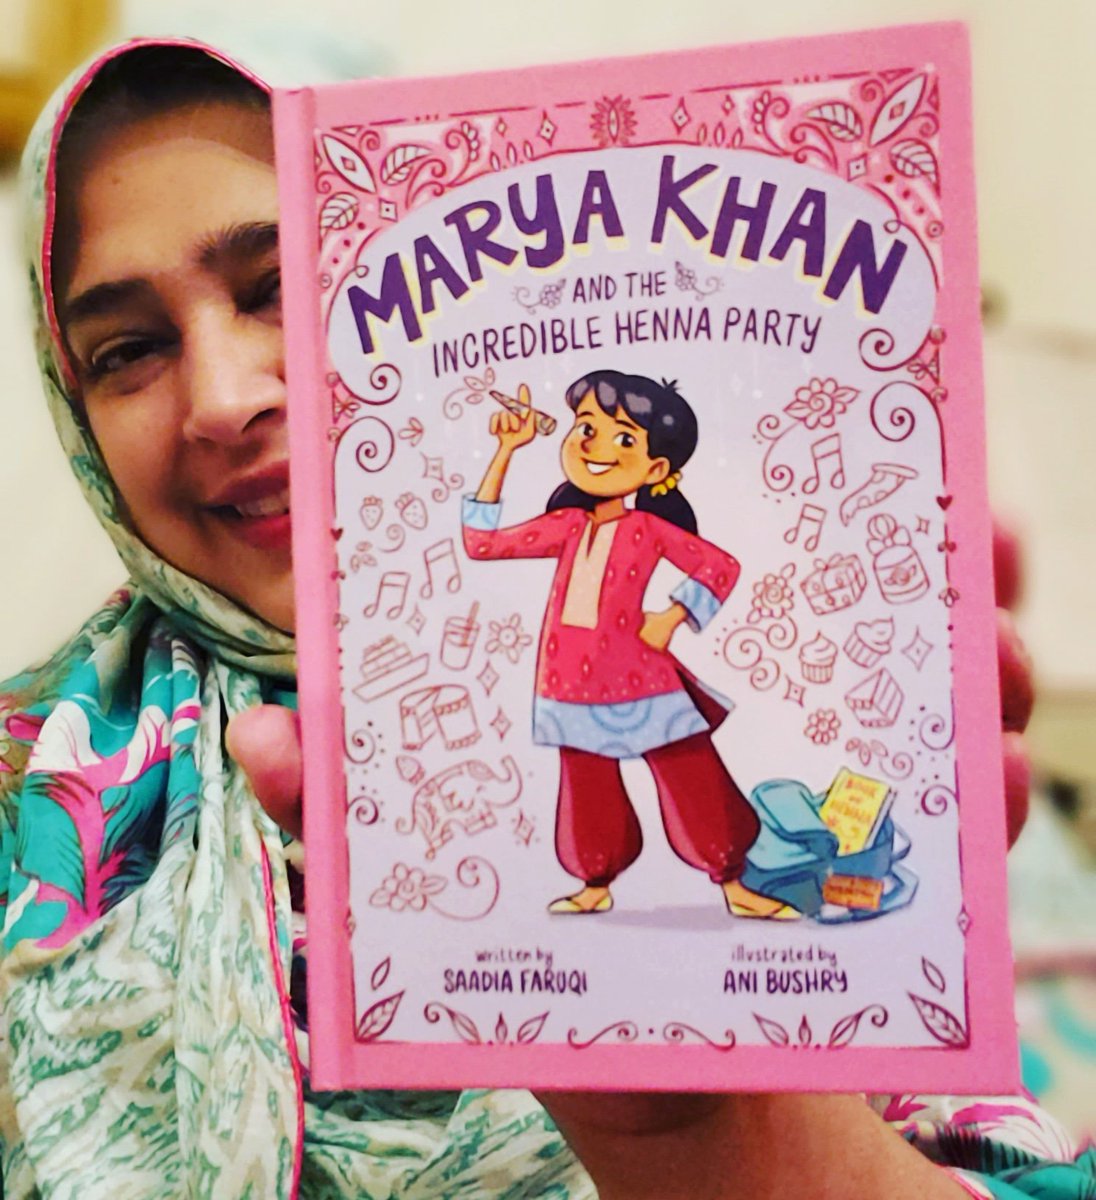 I'm so happy and grateful that Marya Khan And The Incredible Henna Party is out today 💃💃💃